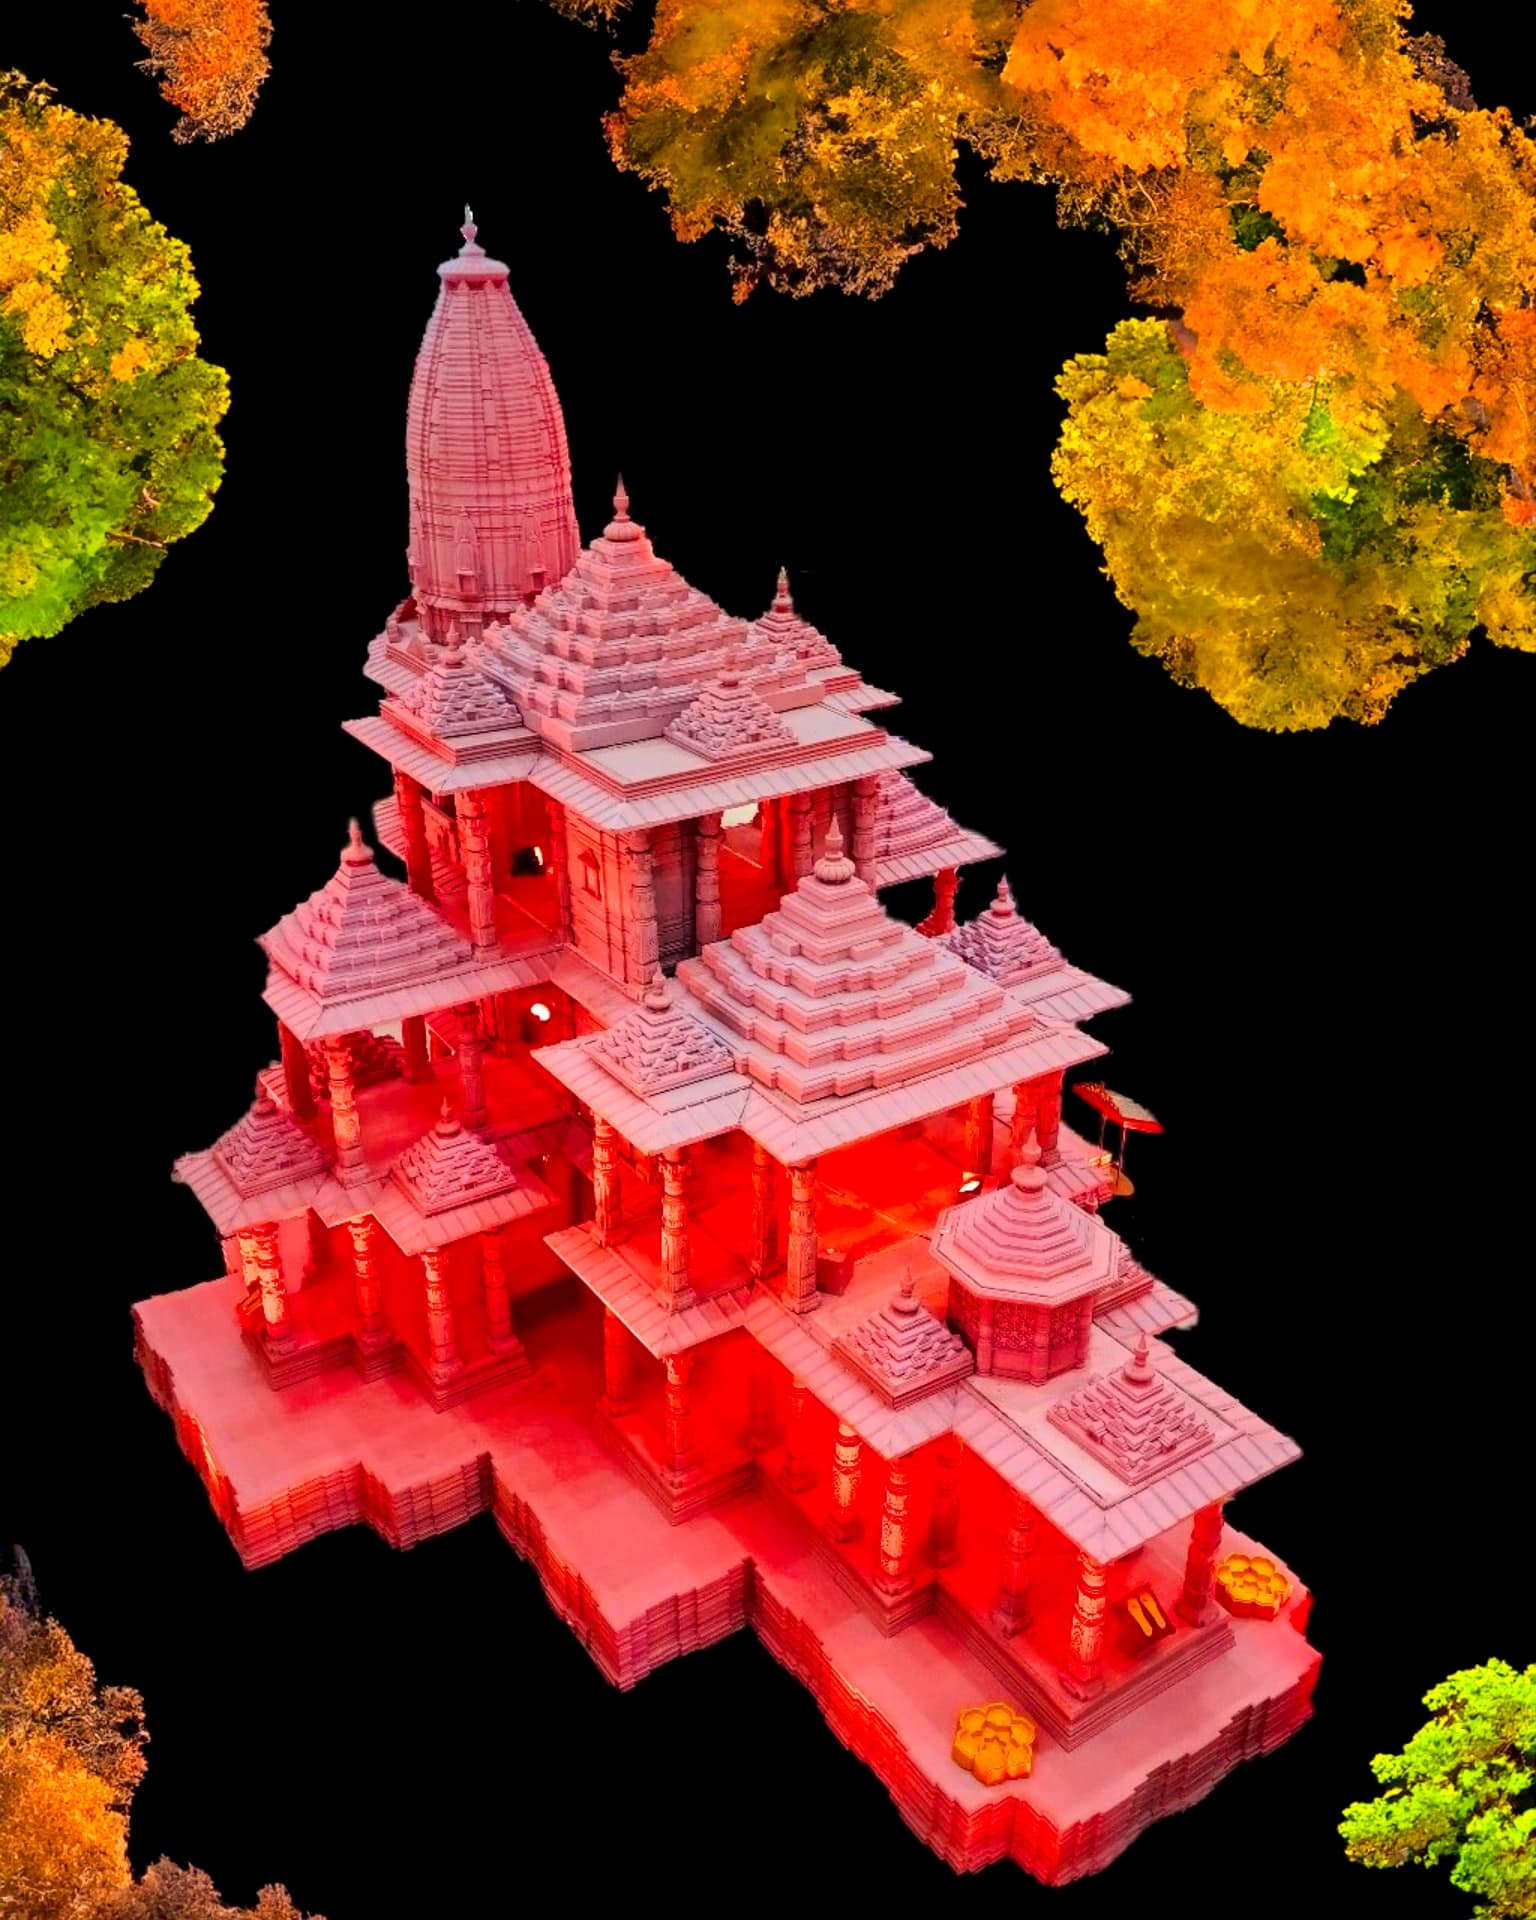 Ayodhya Ram Temple Model made on Occasion of Diwali